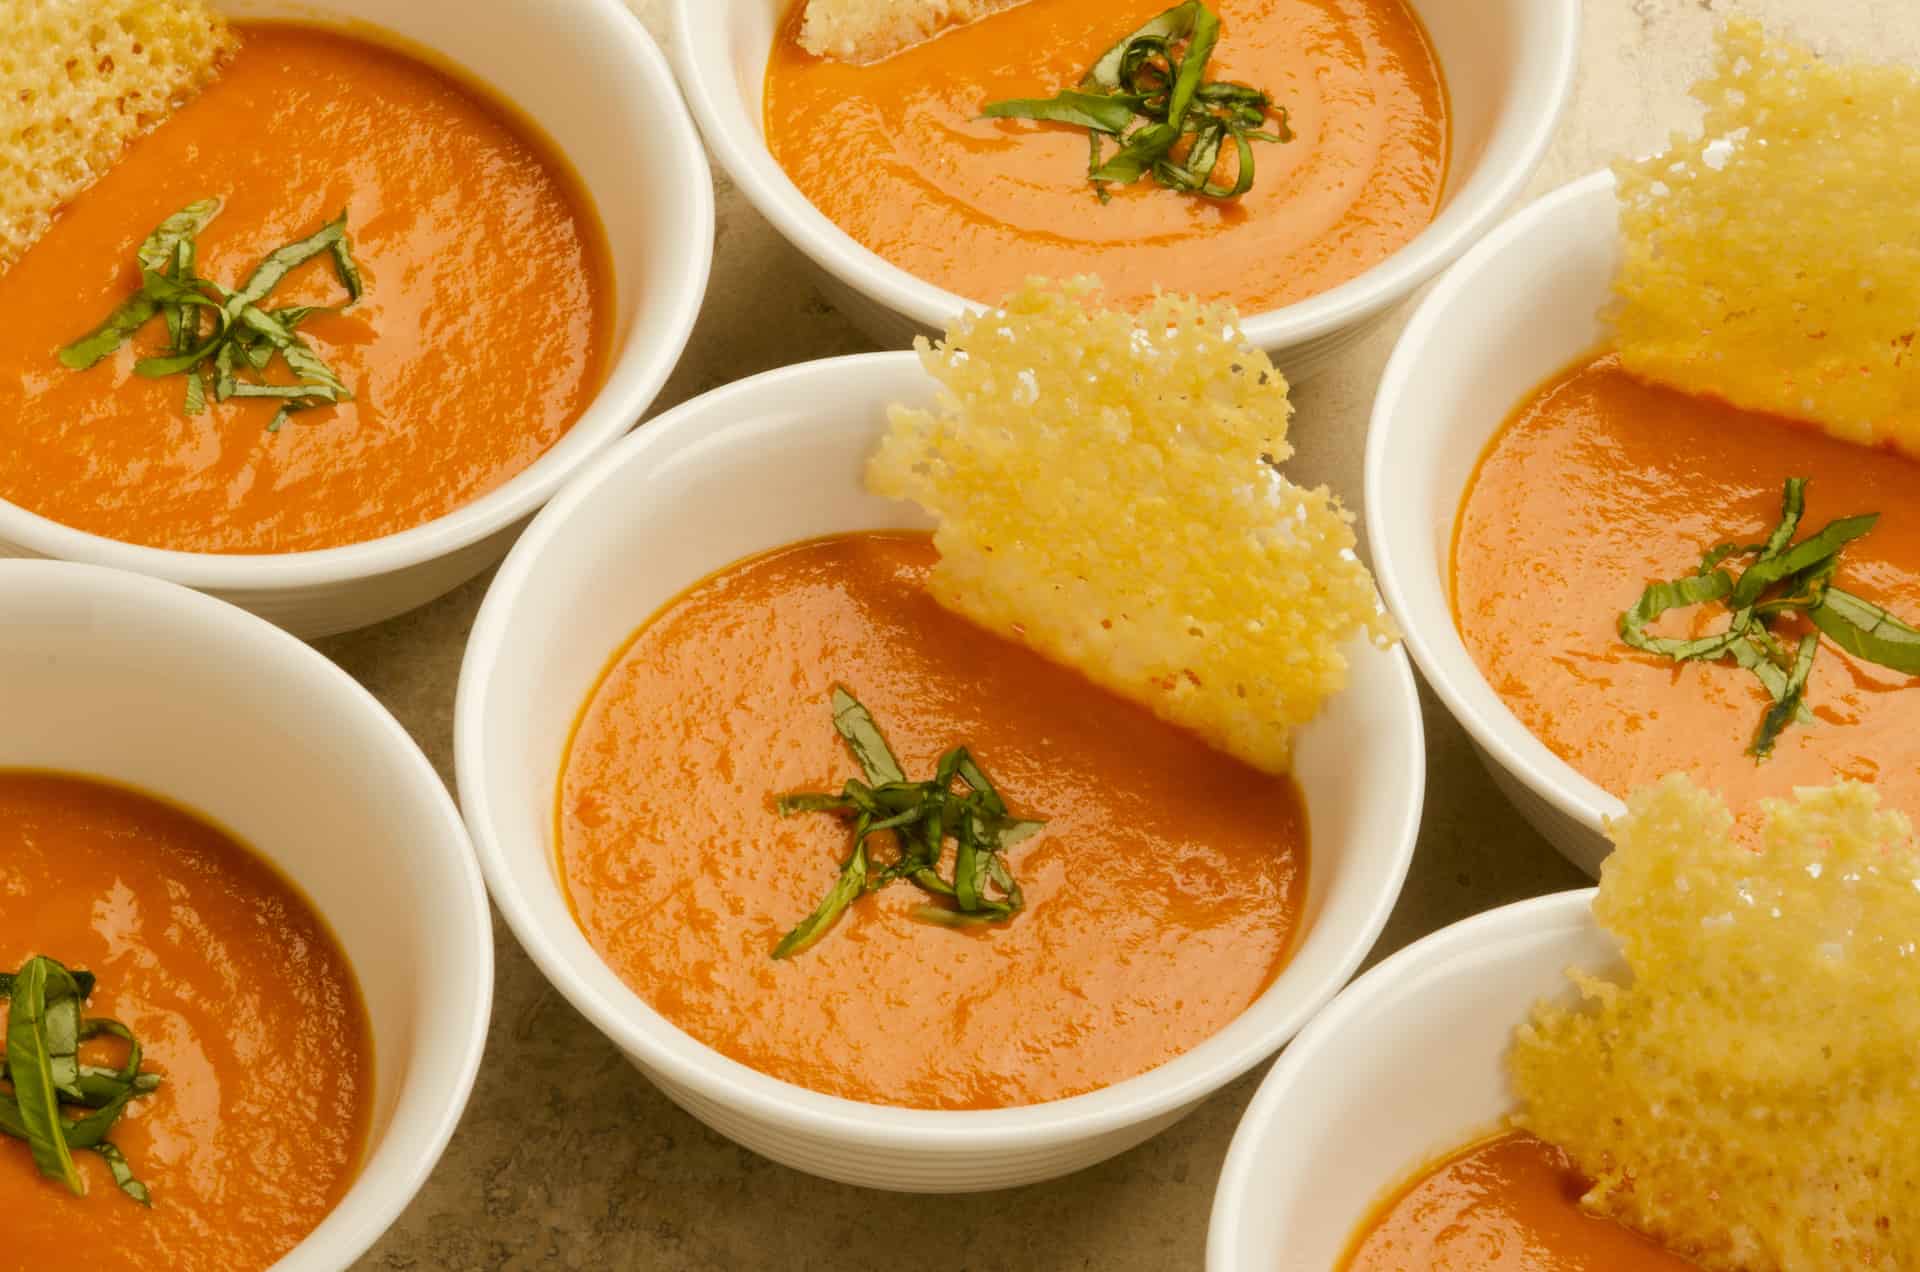 Creamy Tuscan Roasted Tomato Soup with Optional Parmesan Tuiles